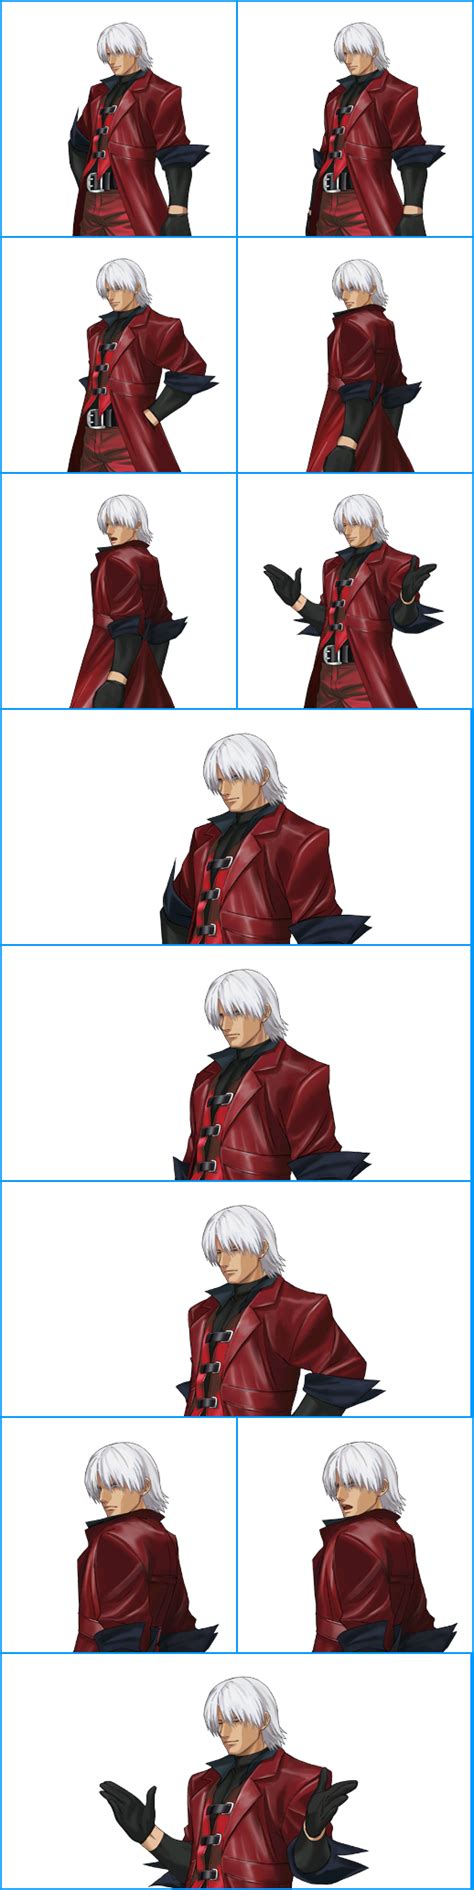 3ds Project X Zone 2 Dante The Spriters Resource